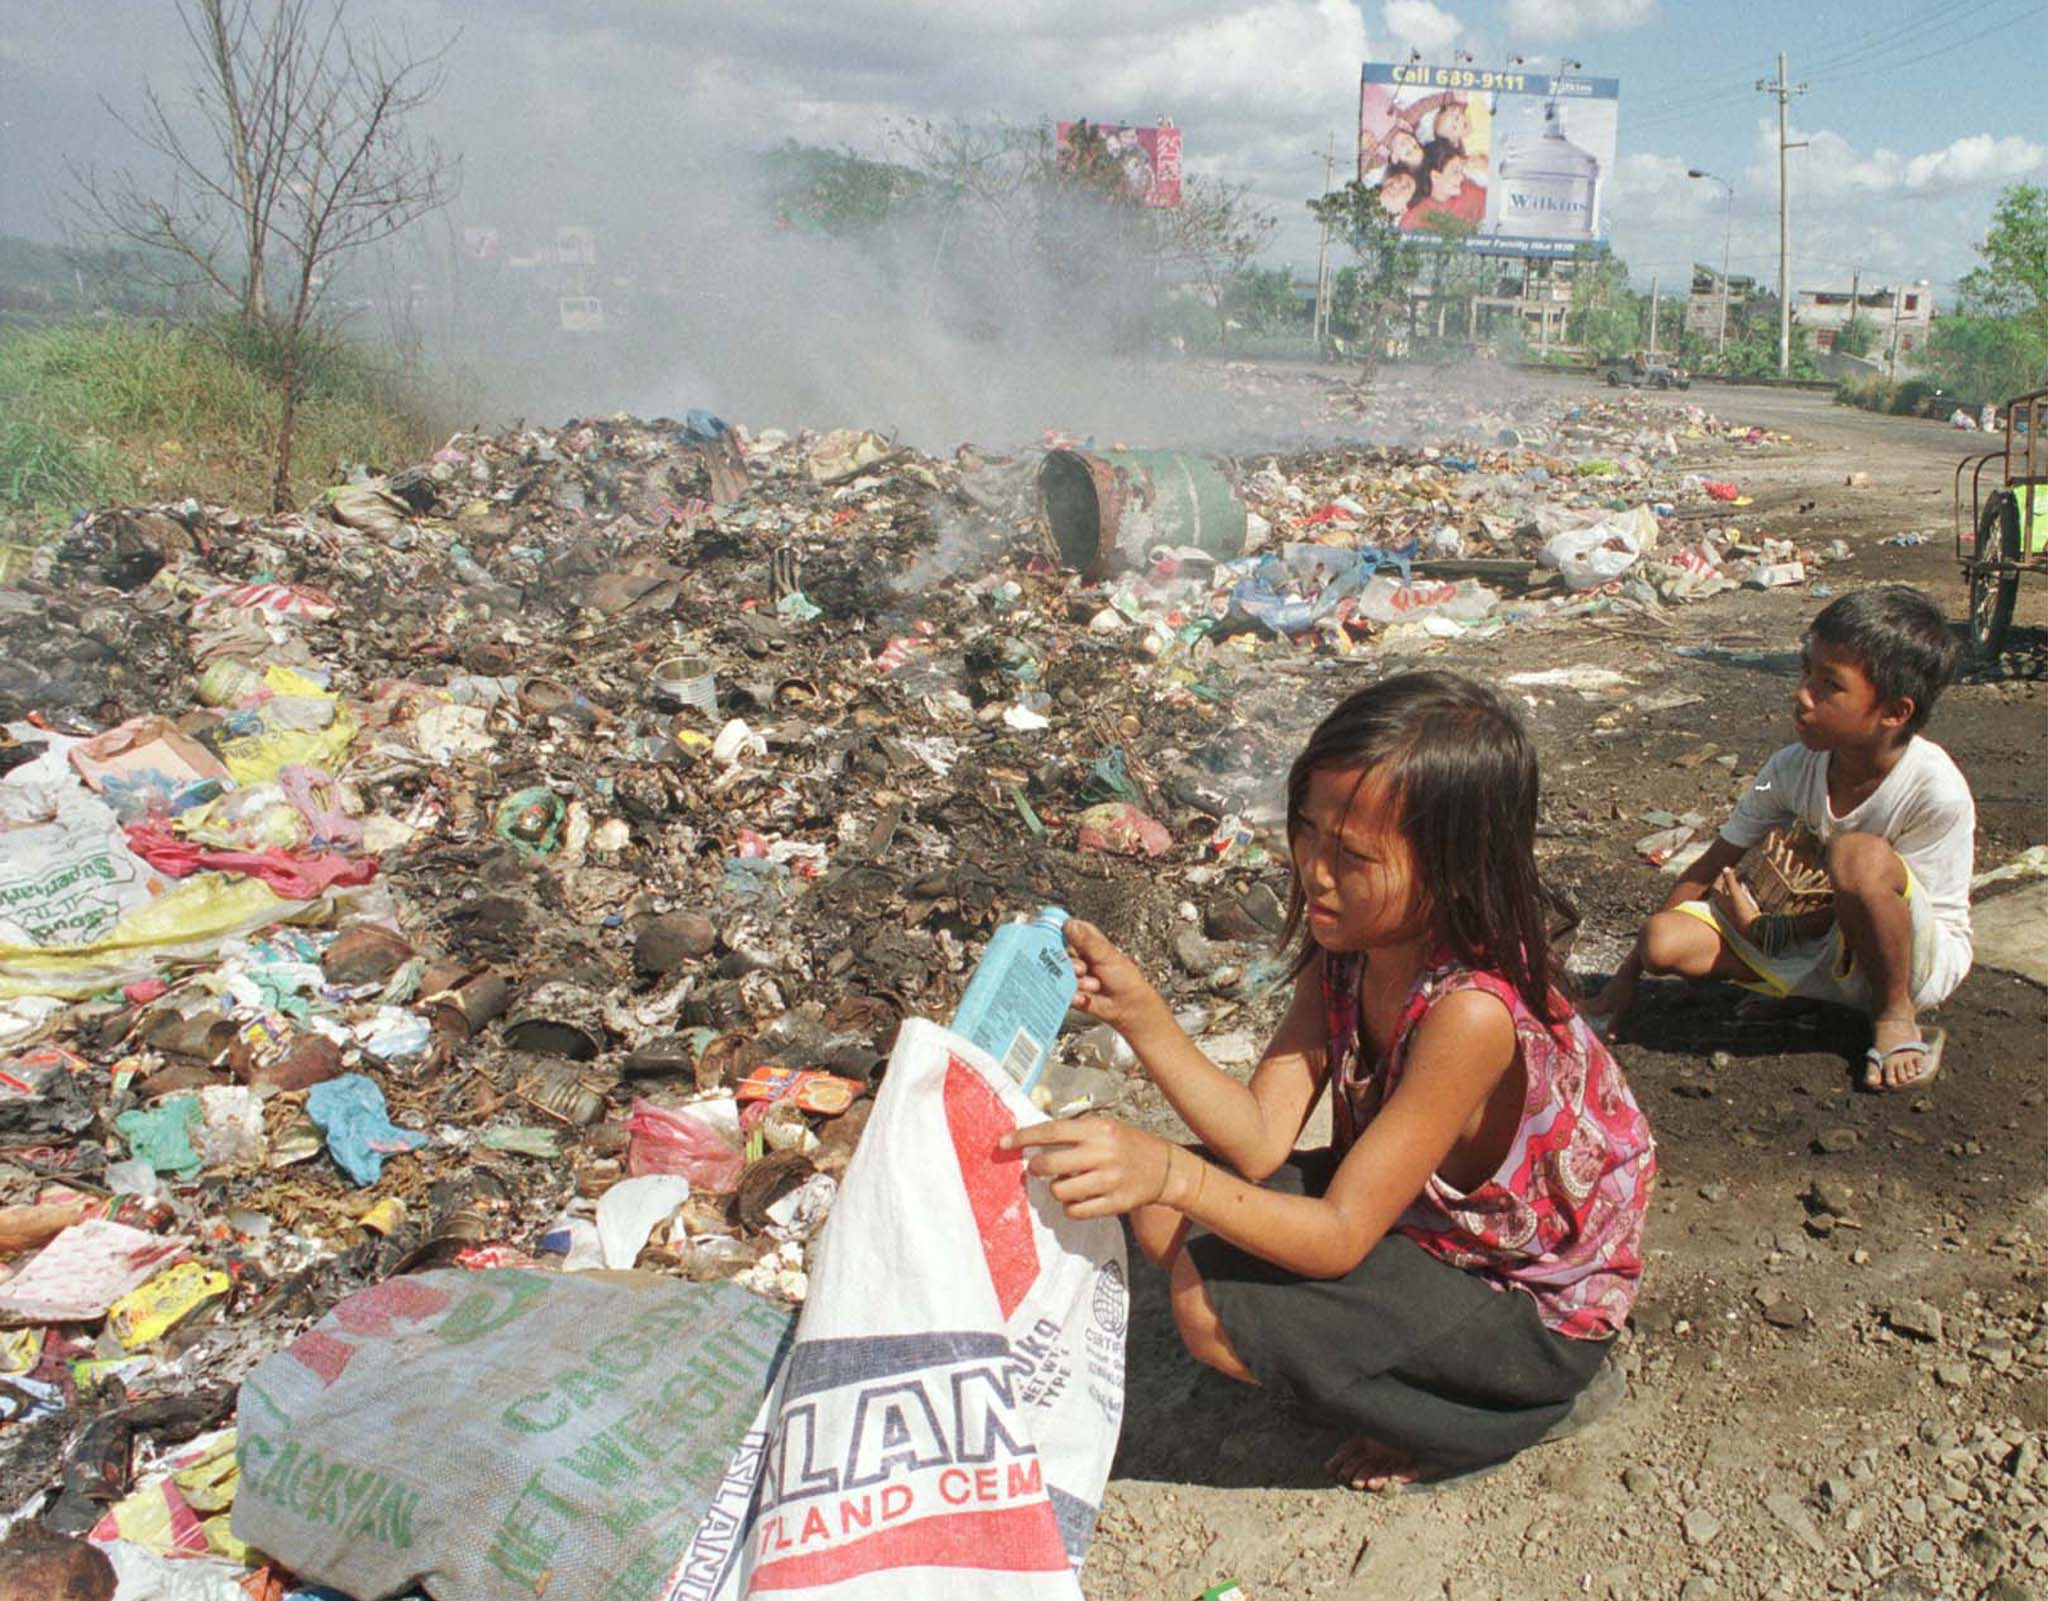 Filipino children gather scraps and other recyclable materials from a smoking garbage dump in Manila